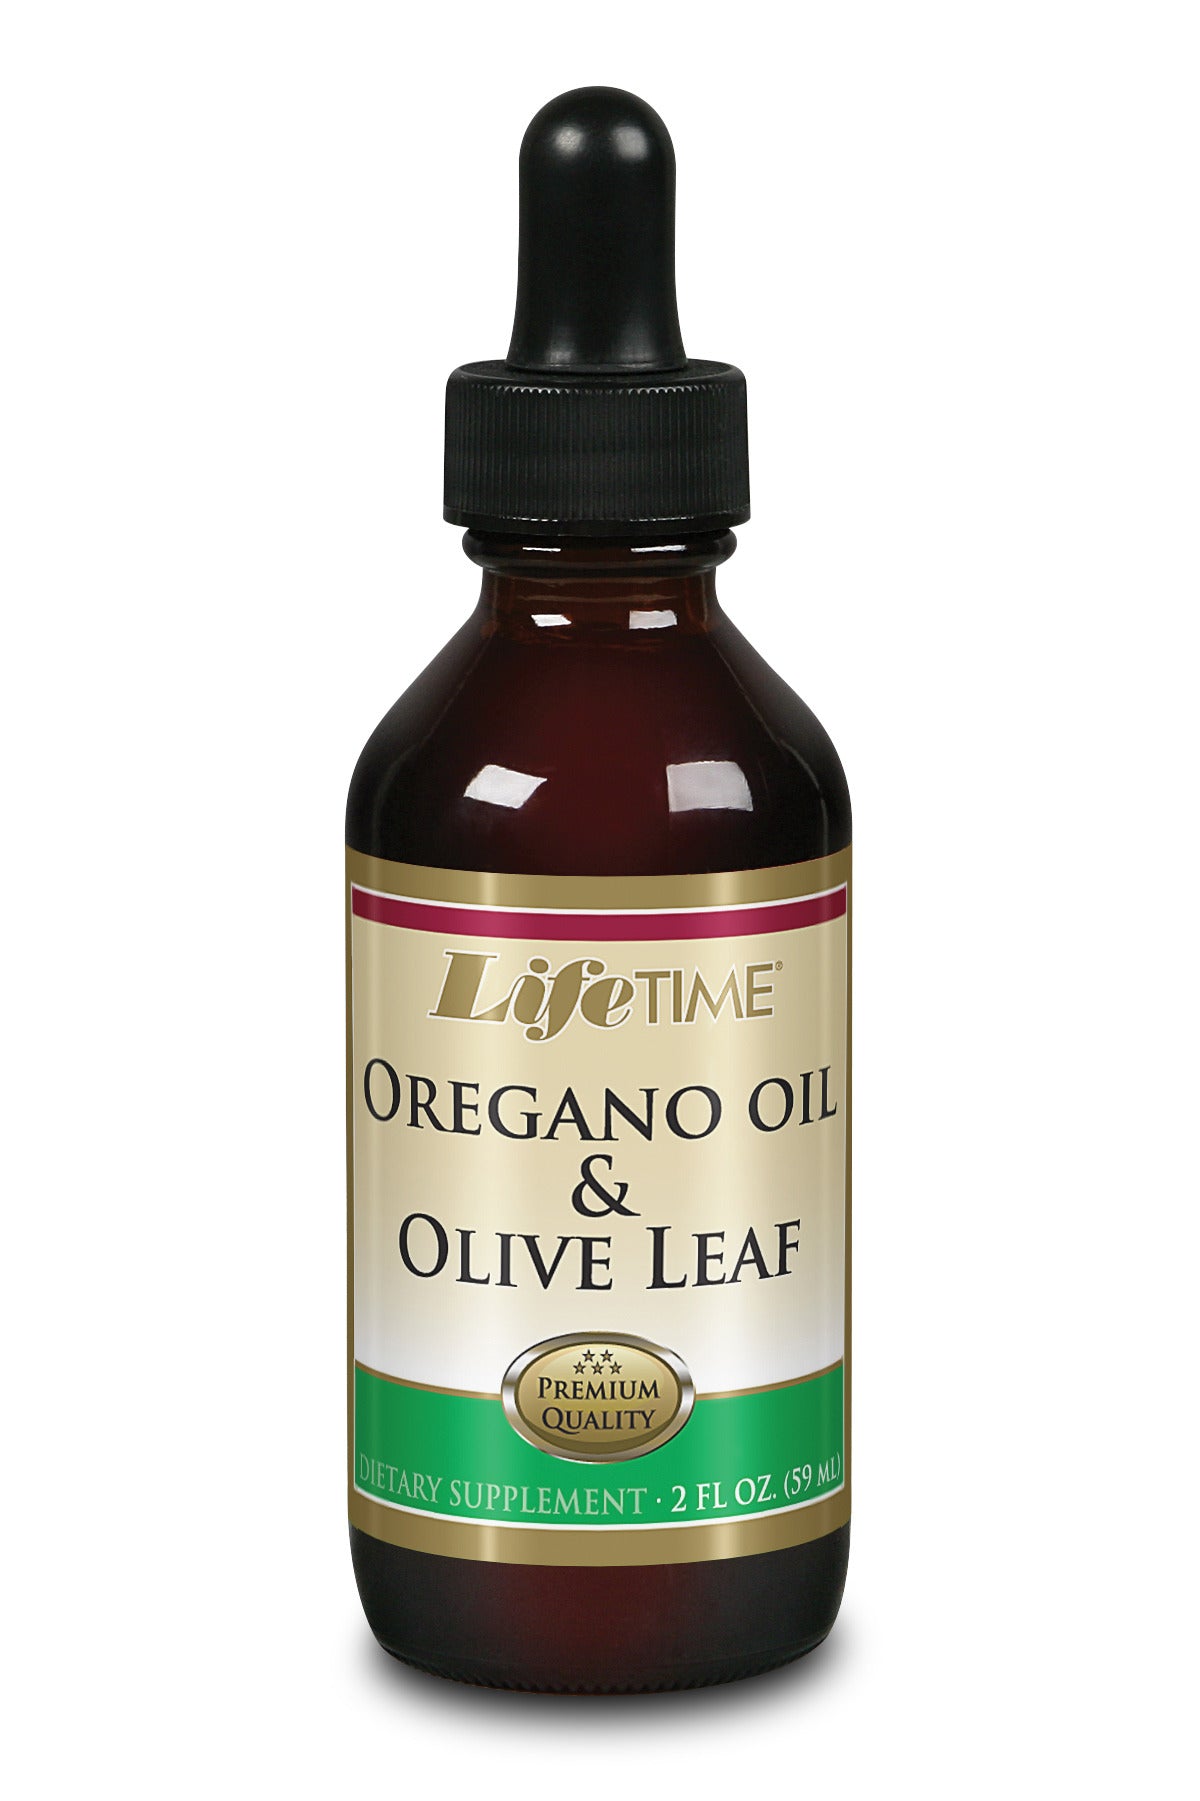 Oregano Oil & Olive Leaf Extract | Herbal Support